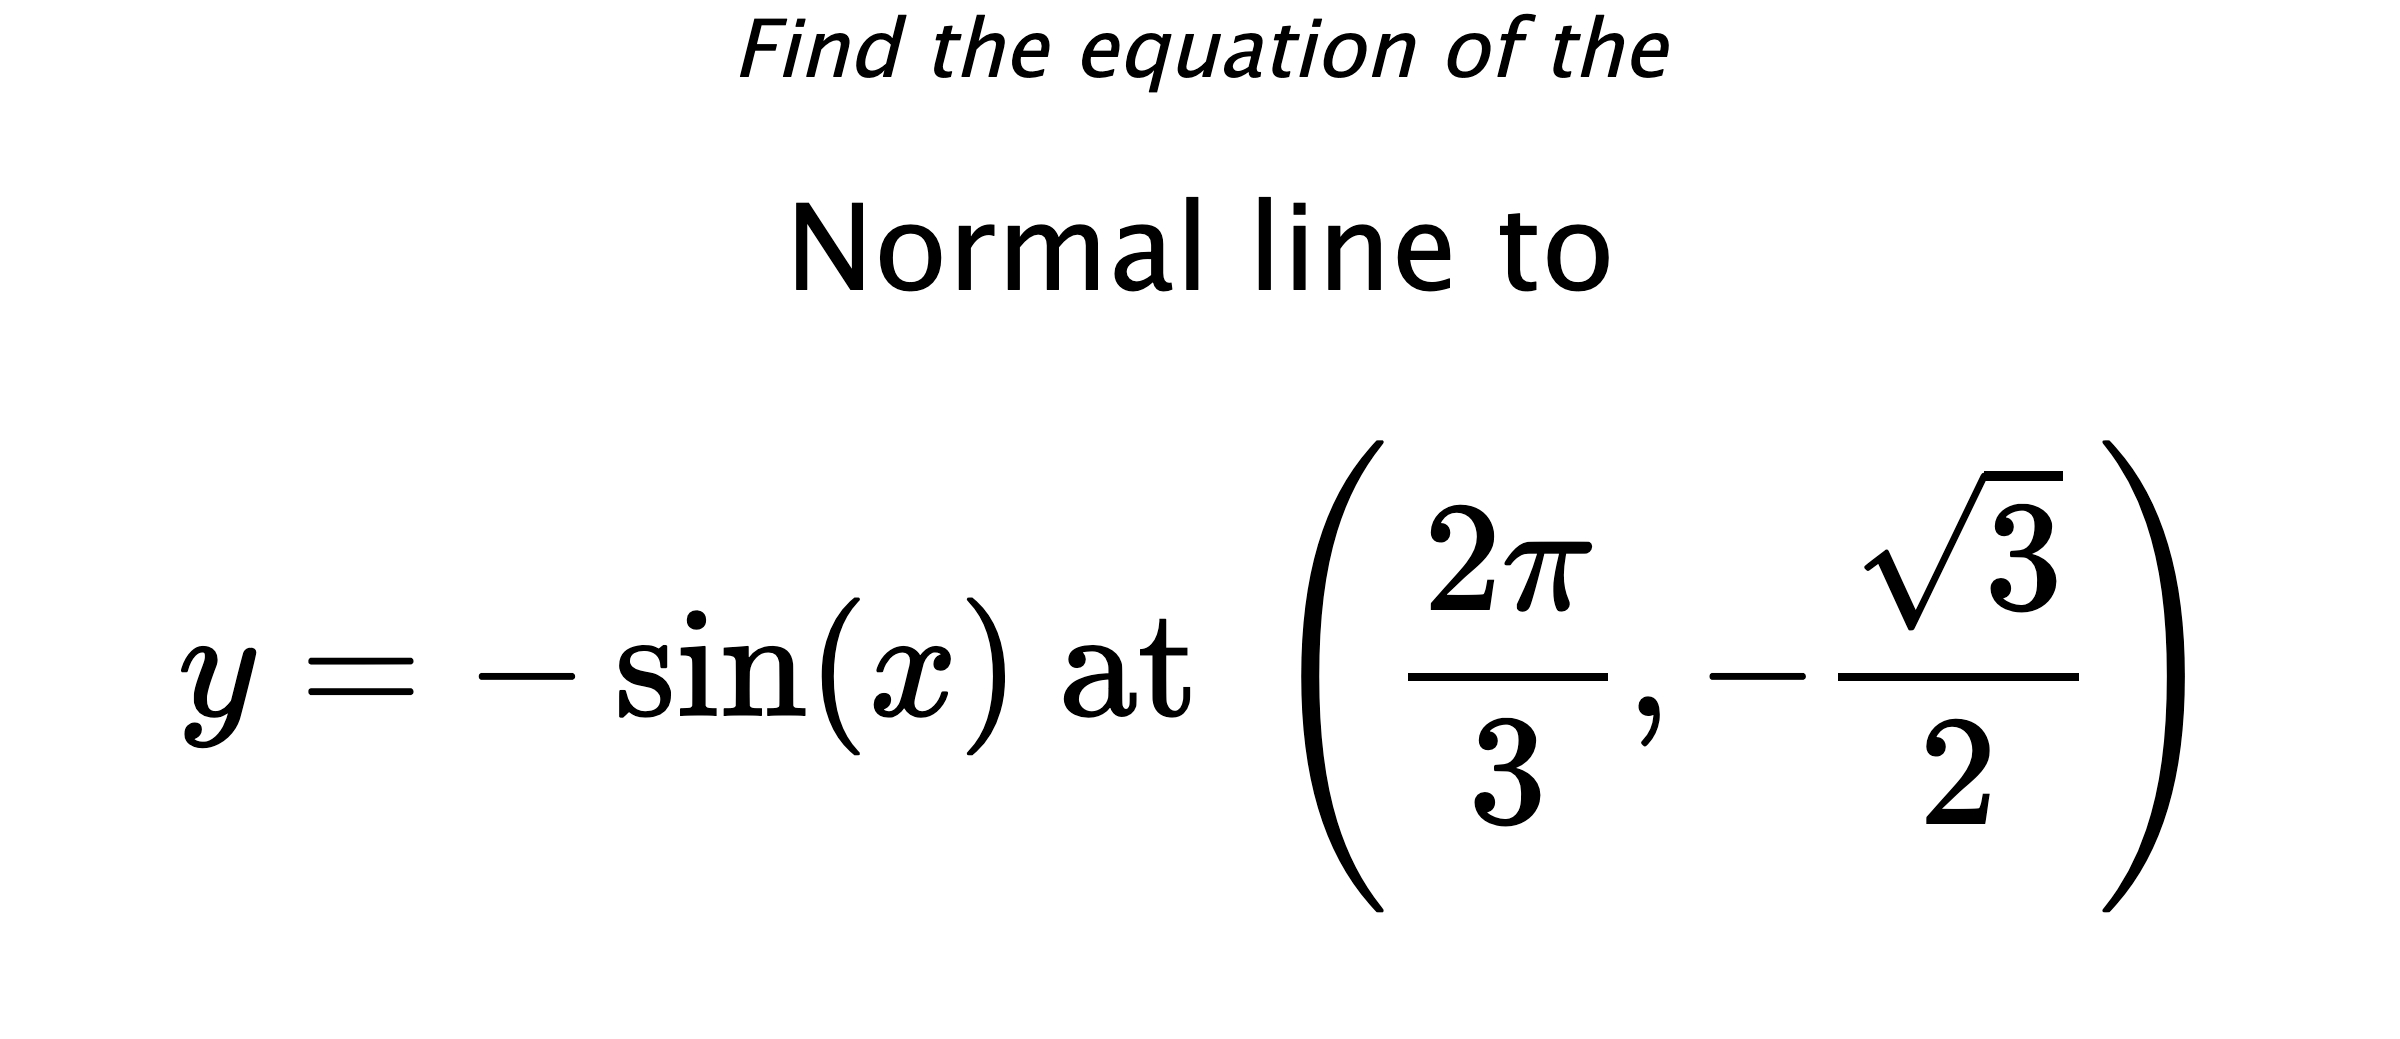 Find the equation of the Normal line to $$ y=-\sin(x) \text{ at } \left(\frac{2\pi}{3},-\frac{\sqrt{3}}{2}\right) $$